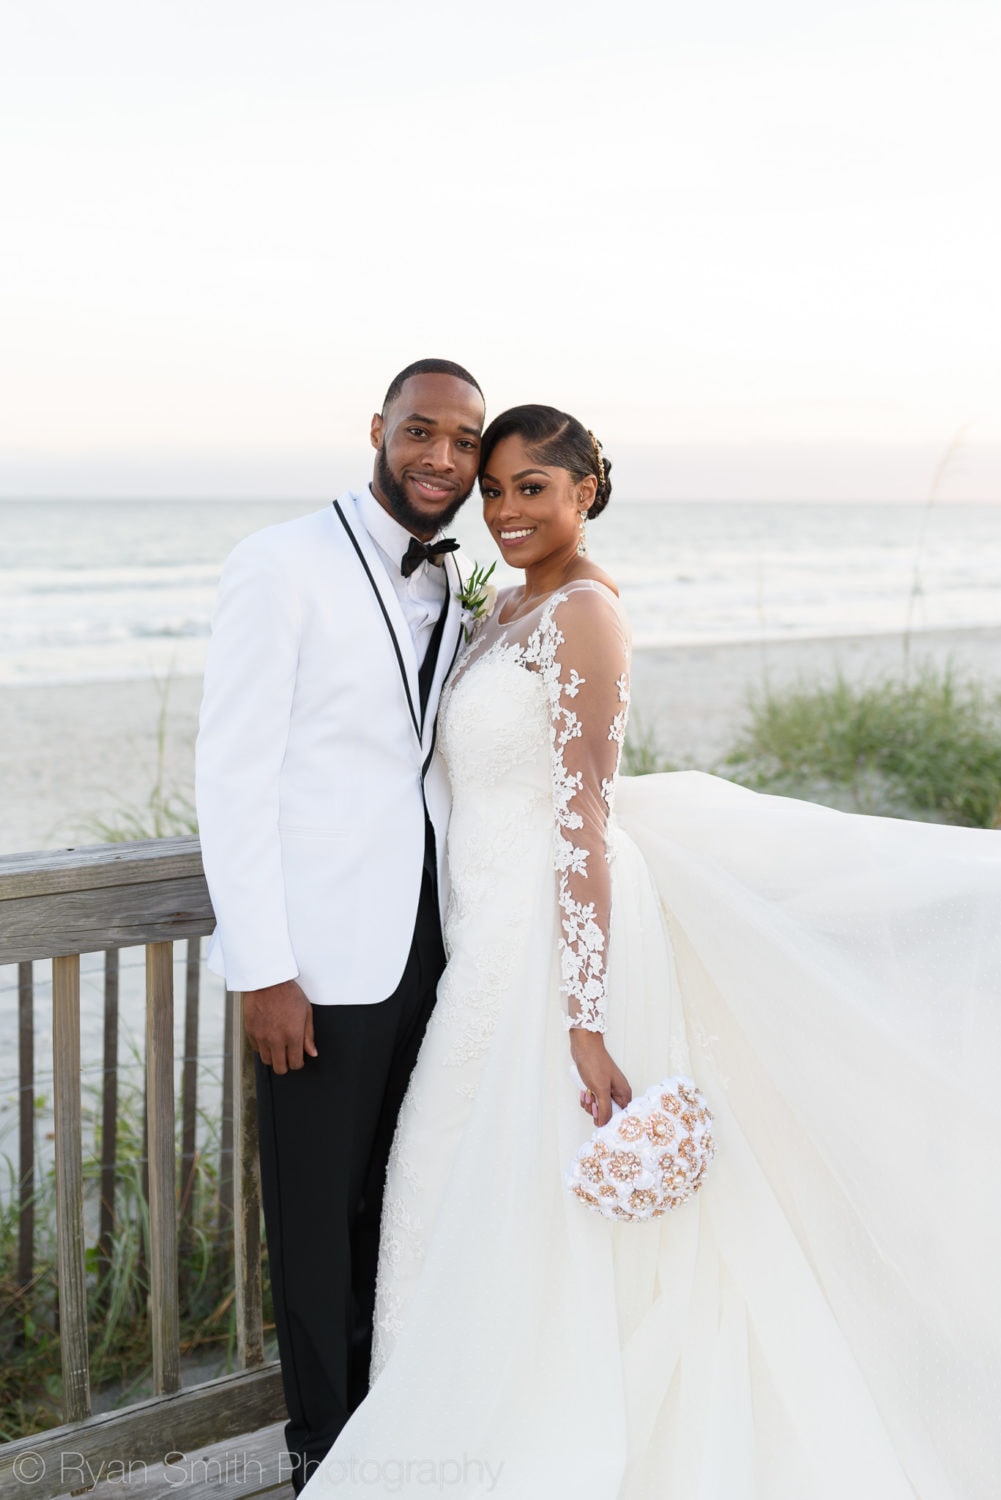 Couple in front of the ocean - Doubletree Resort by Hilton Myrtle Beach